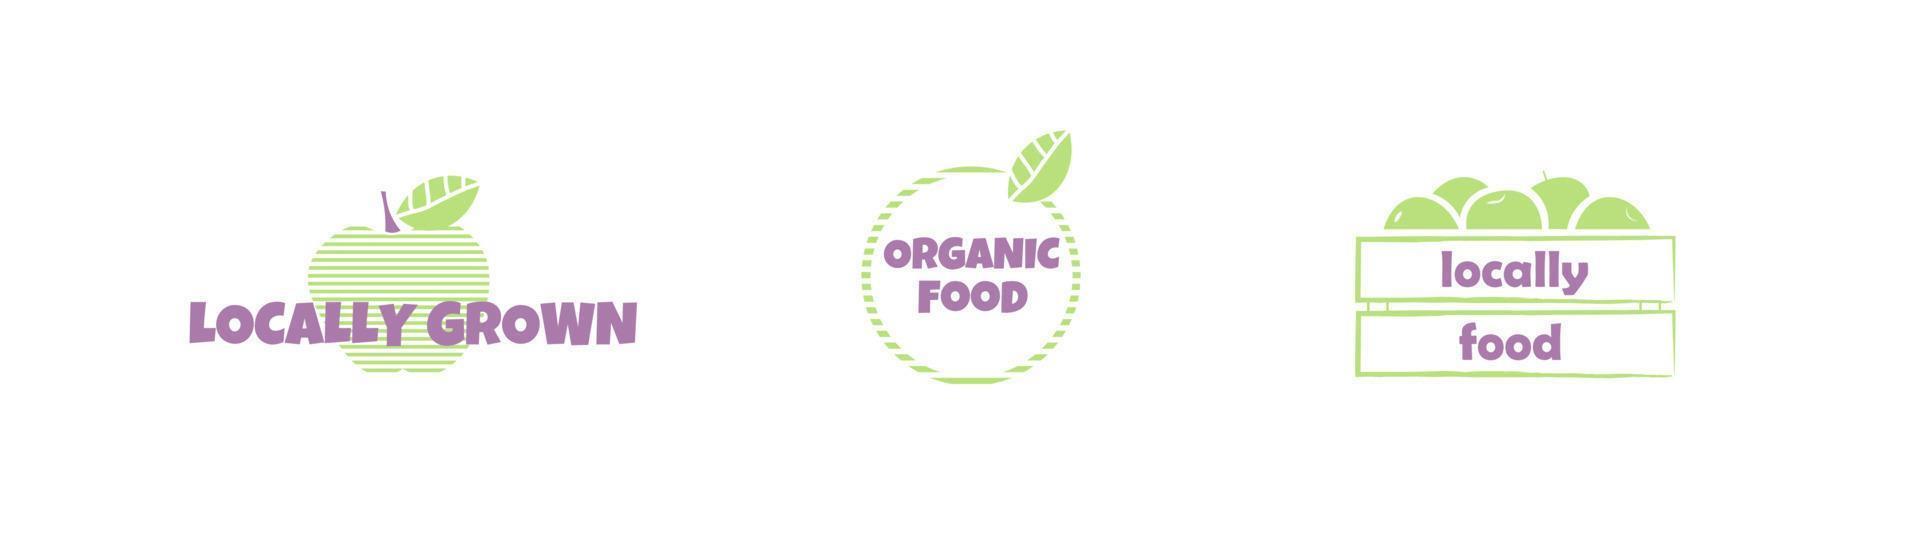 Eco, bio, organic sticker, label, ecology icon. Logo template with green leaves for locally grown organic food. Vector illustration.